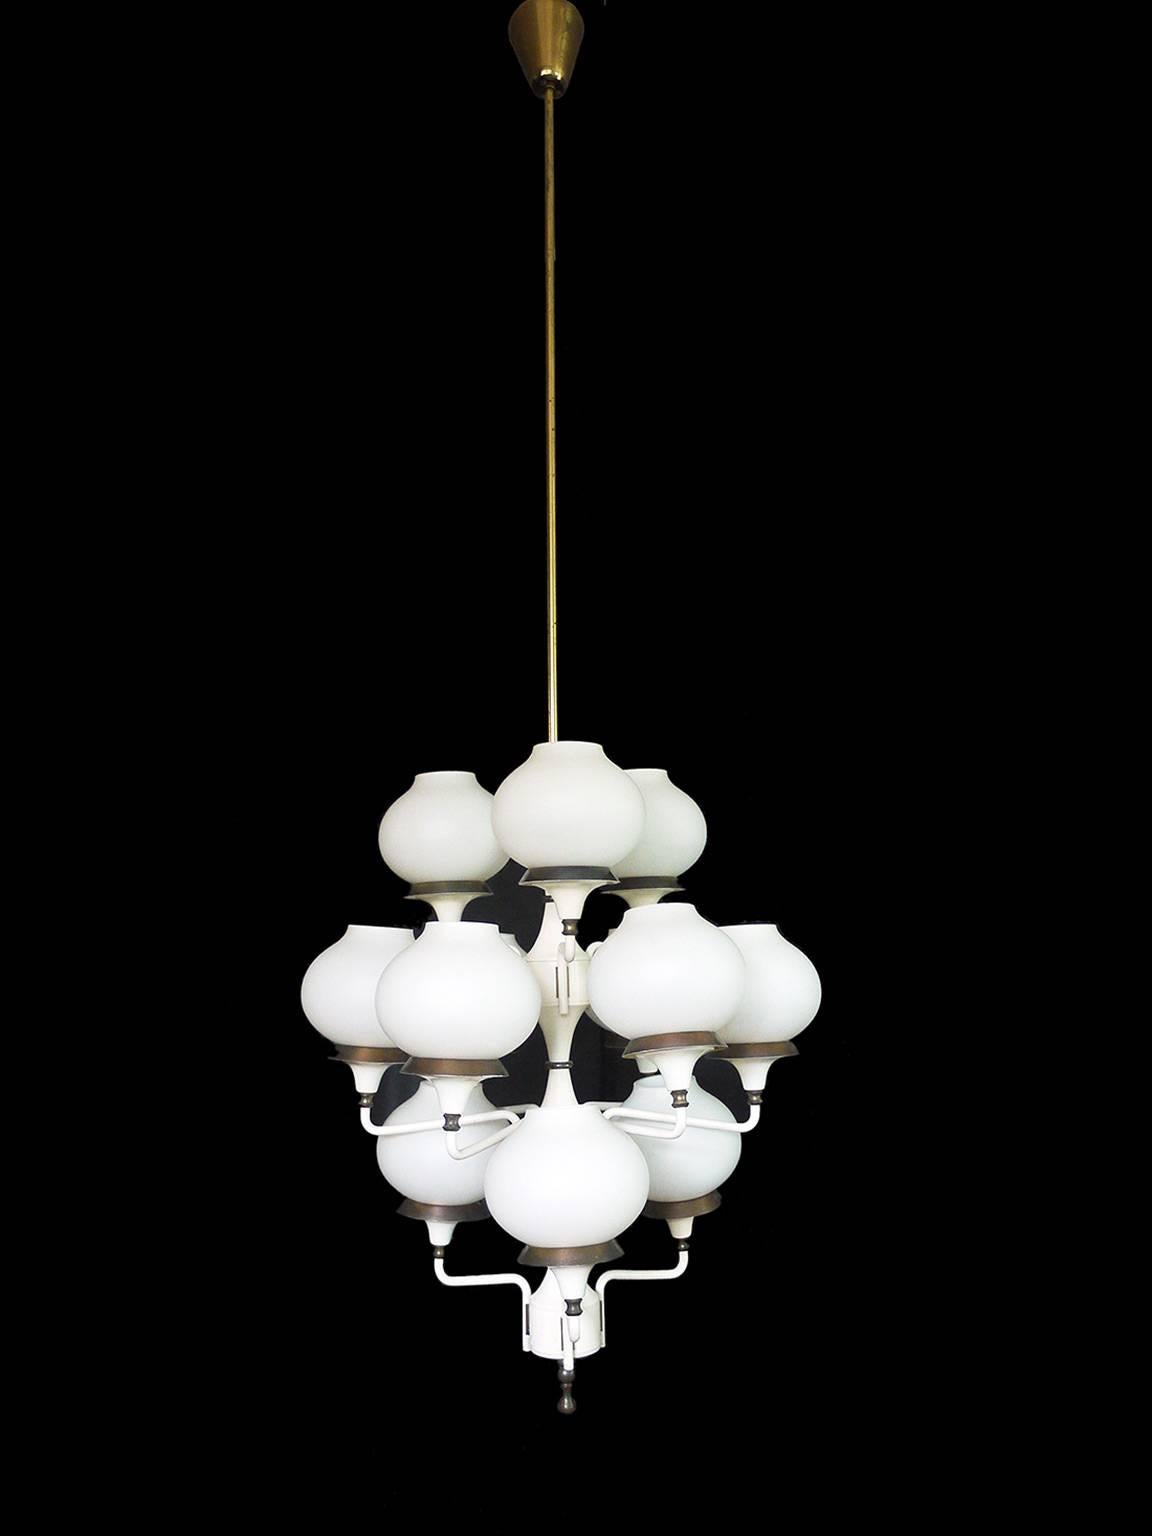 Elegant chandelier with 12 overlay satin glass globes on a white lacquered metal frame with brass finals. Manufactured by Hans-Agne Jakobsson, Sweden in the 1950s

Design: Hans-Agne Jakobsson. 
Model: Tulipan, Sputnik. 
Style: Mid Century Modern,